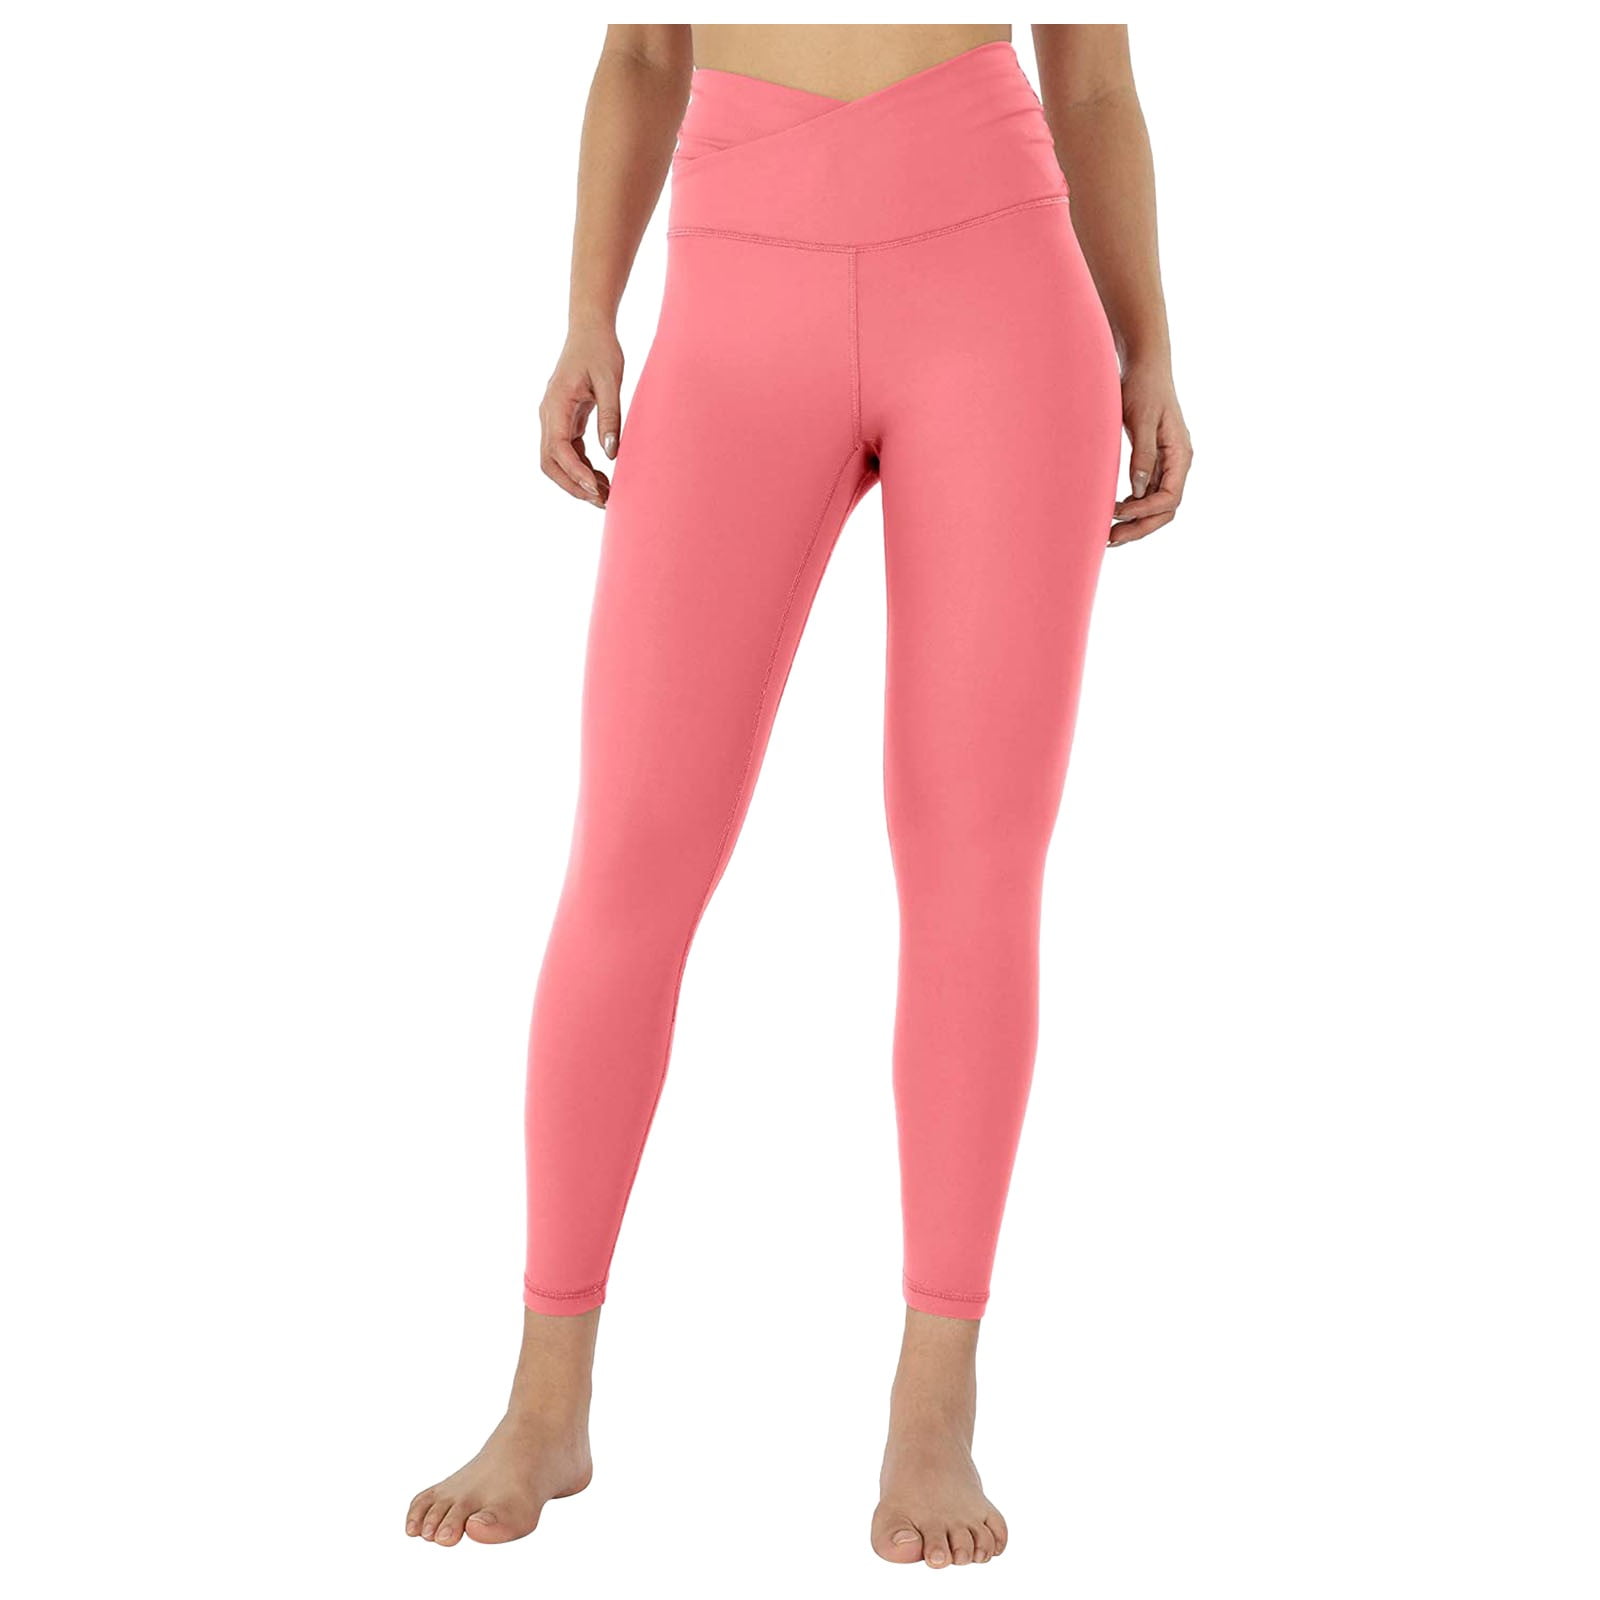 Gubotare Yoga Pants Womens Crossover Flare Leggings High Waisted Casual  Cute Stretchy Full Length Workout Elegant Yoga Pants,Pink M 